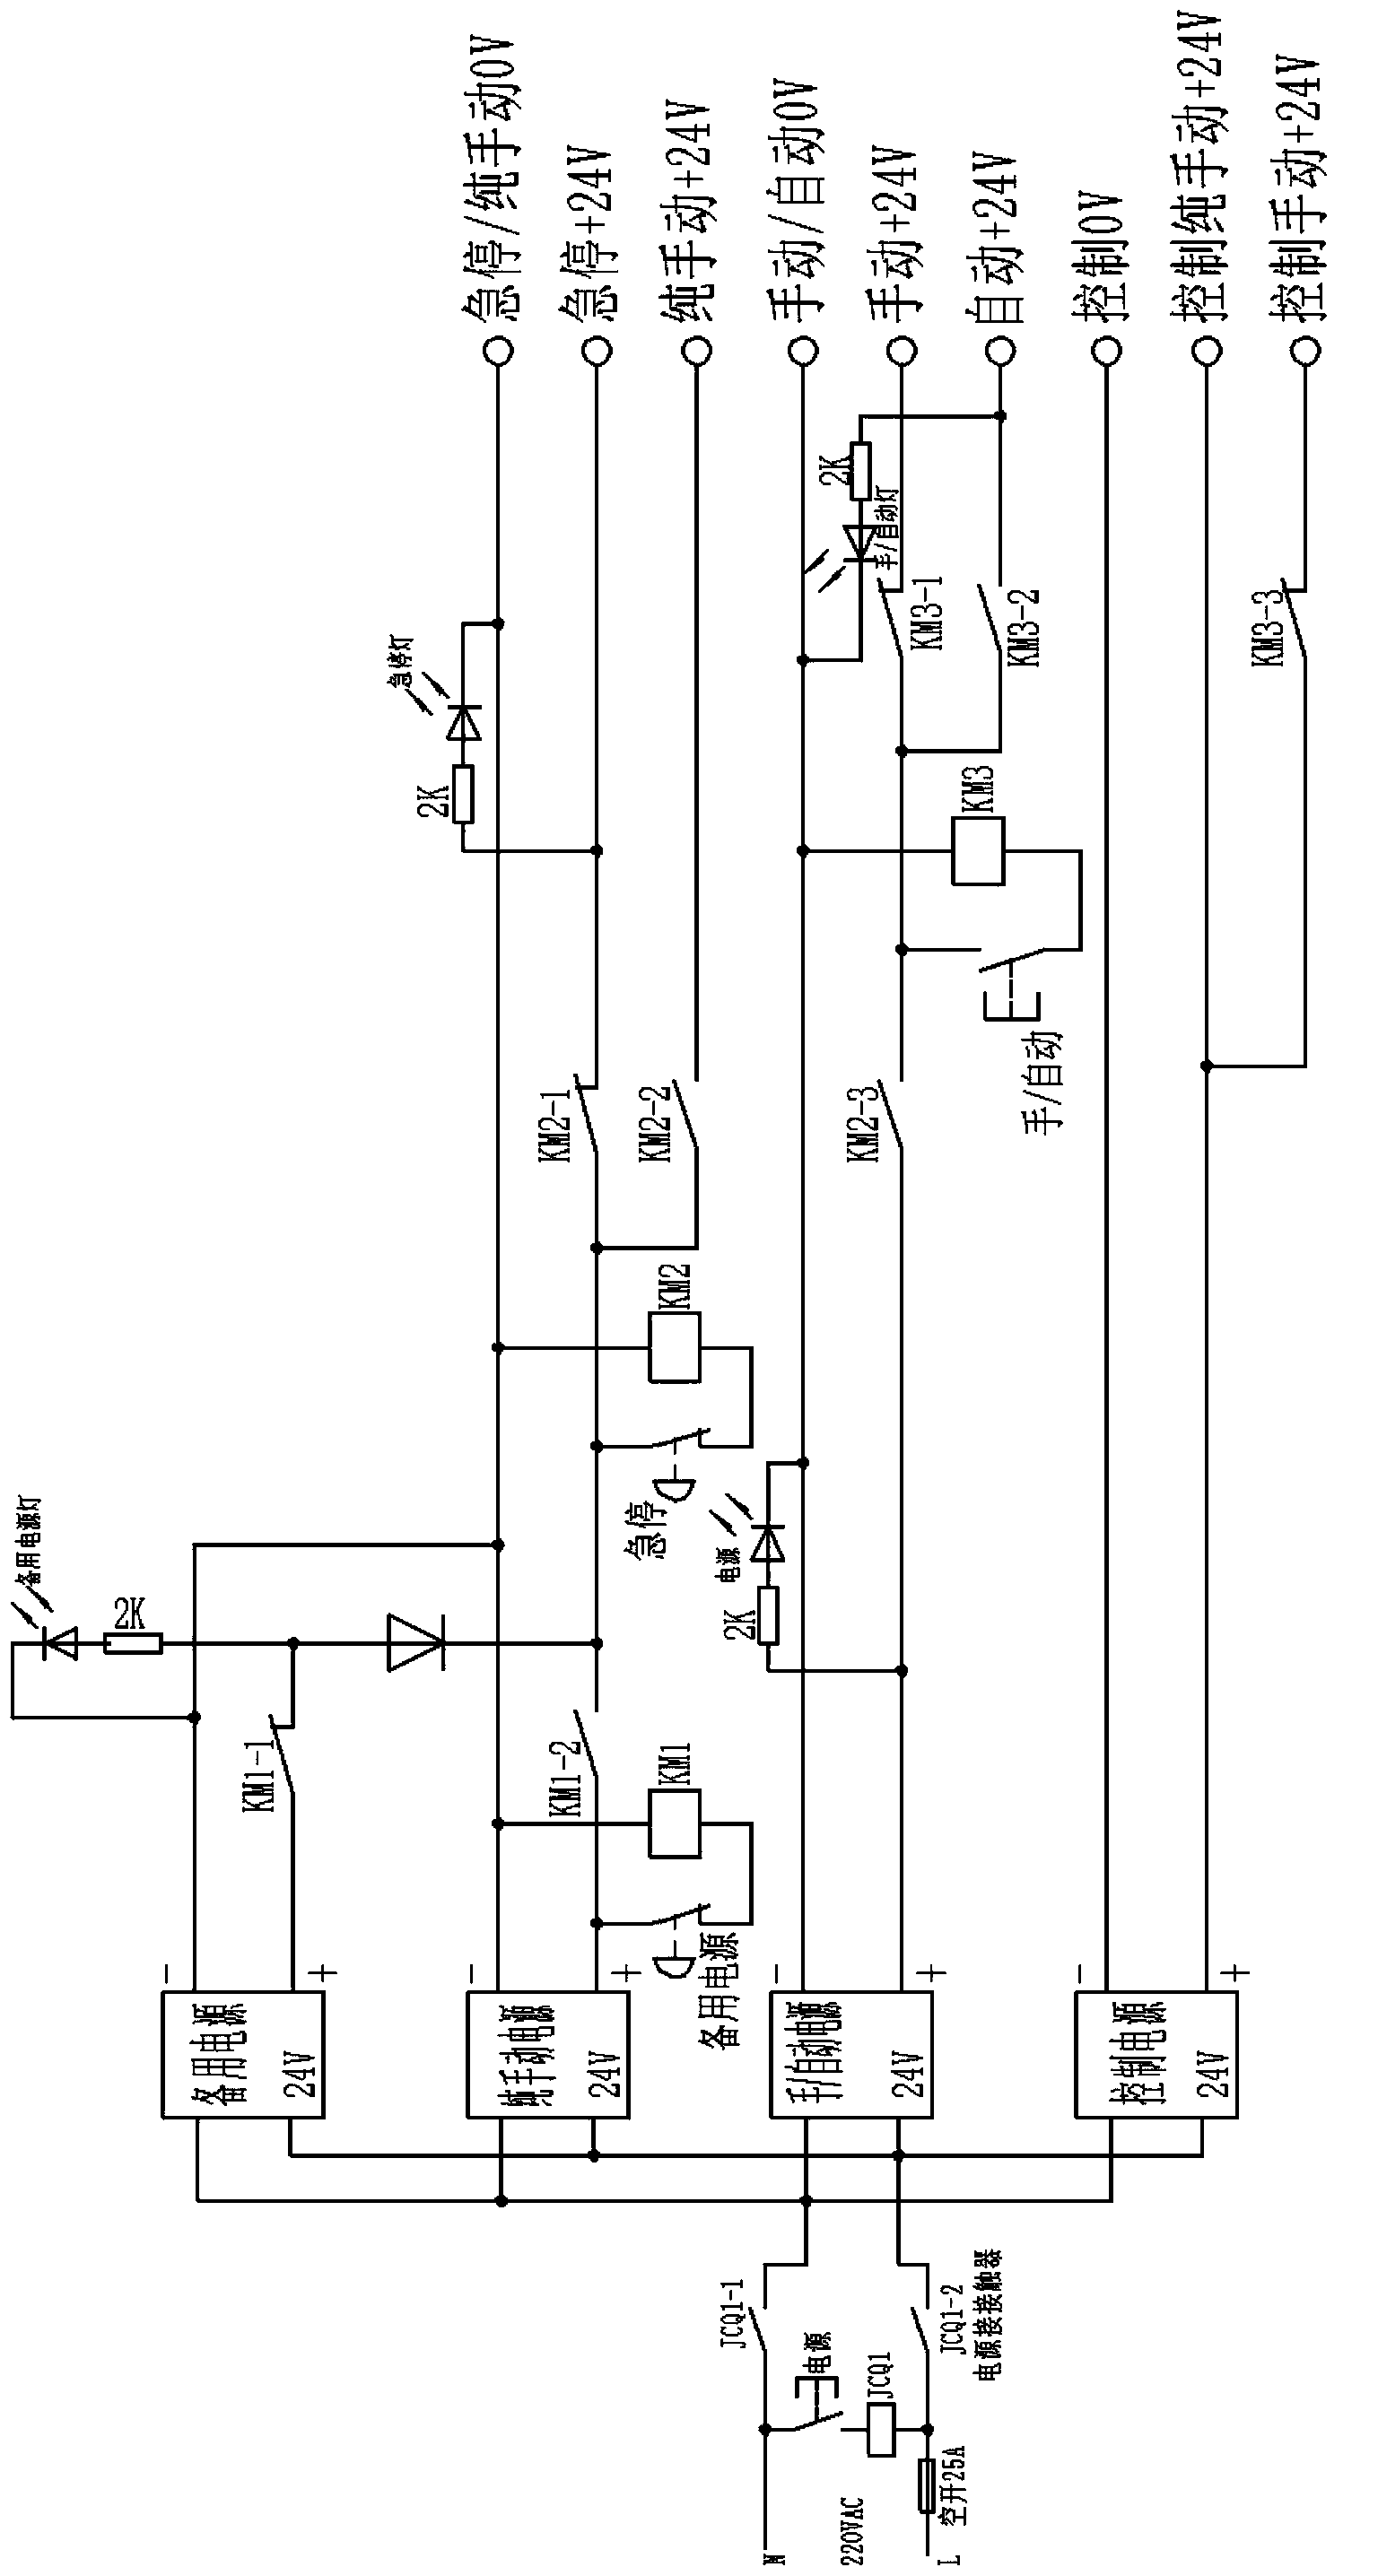 Electric equipment control circuit applied to supersonic combustion test